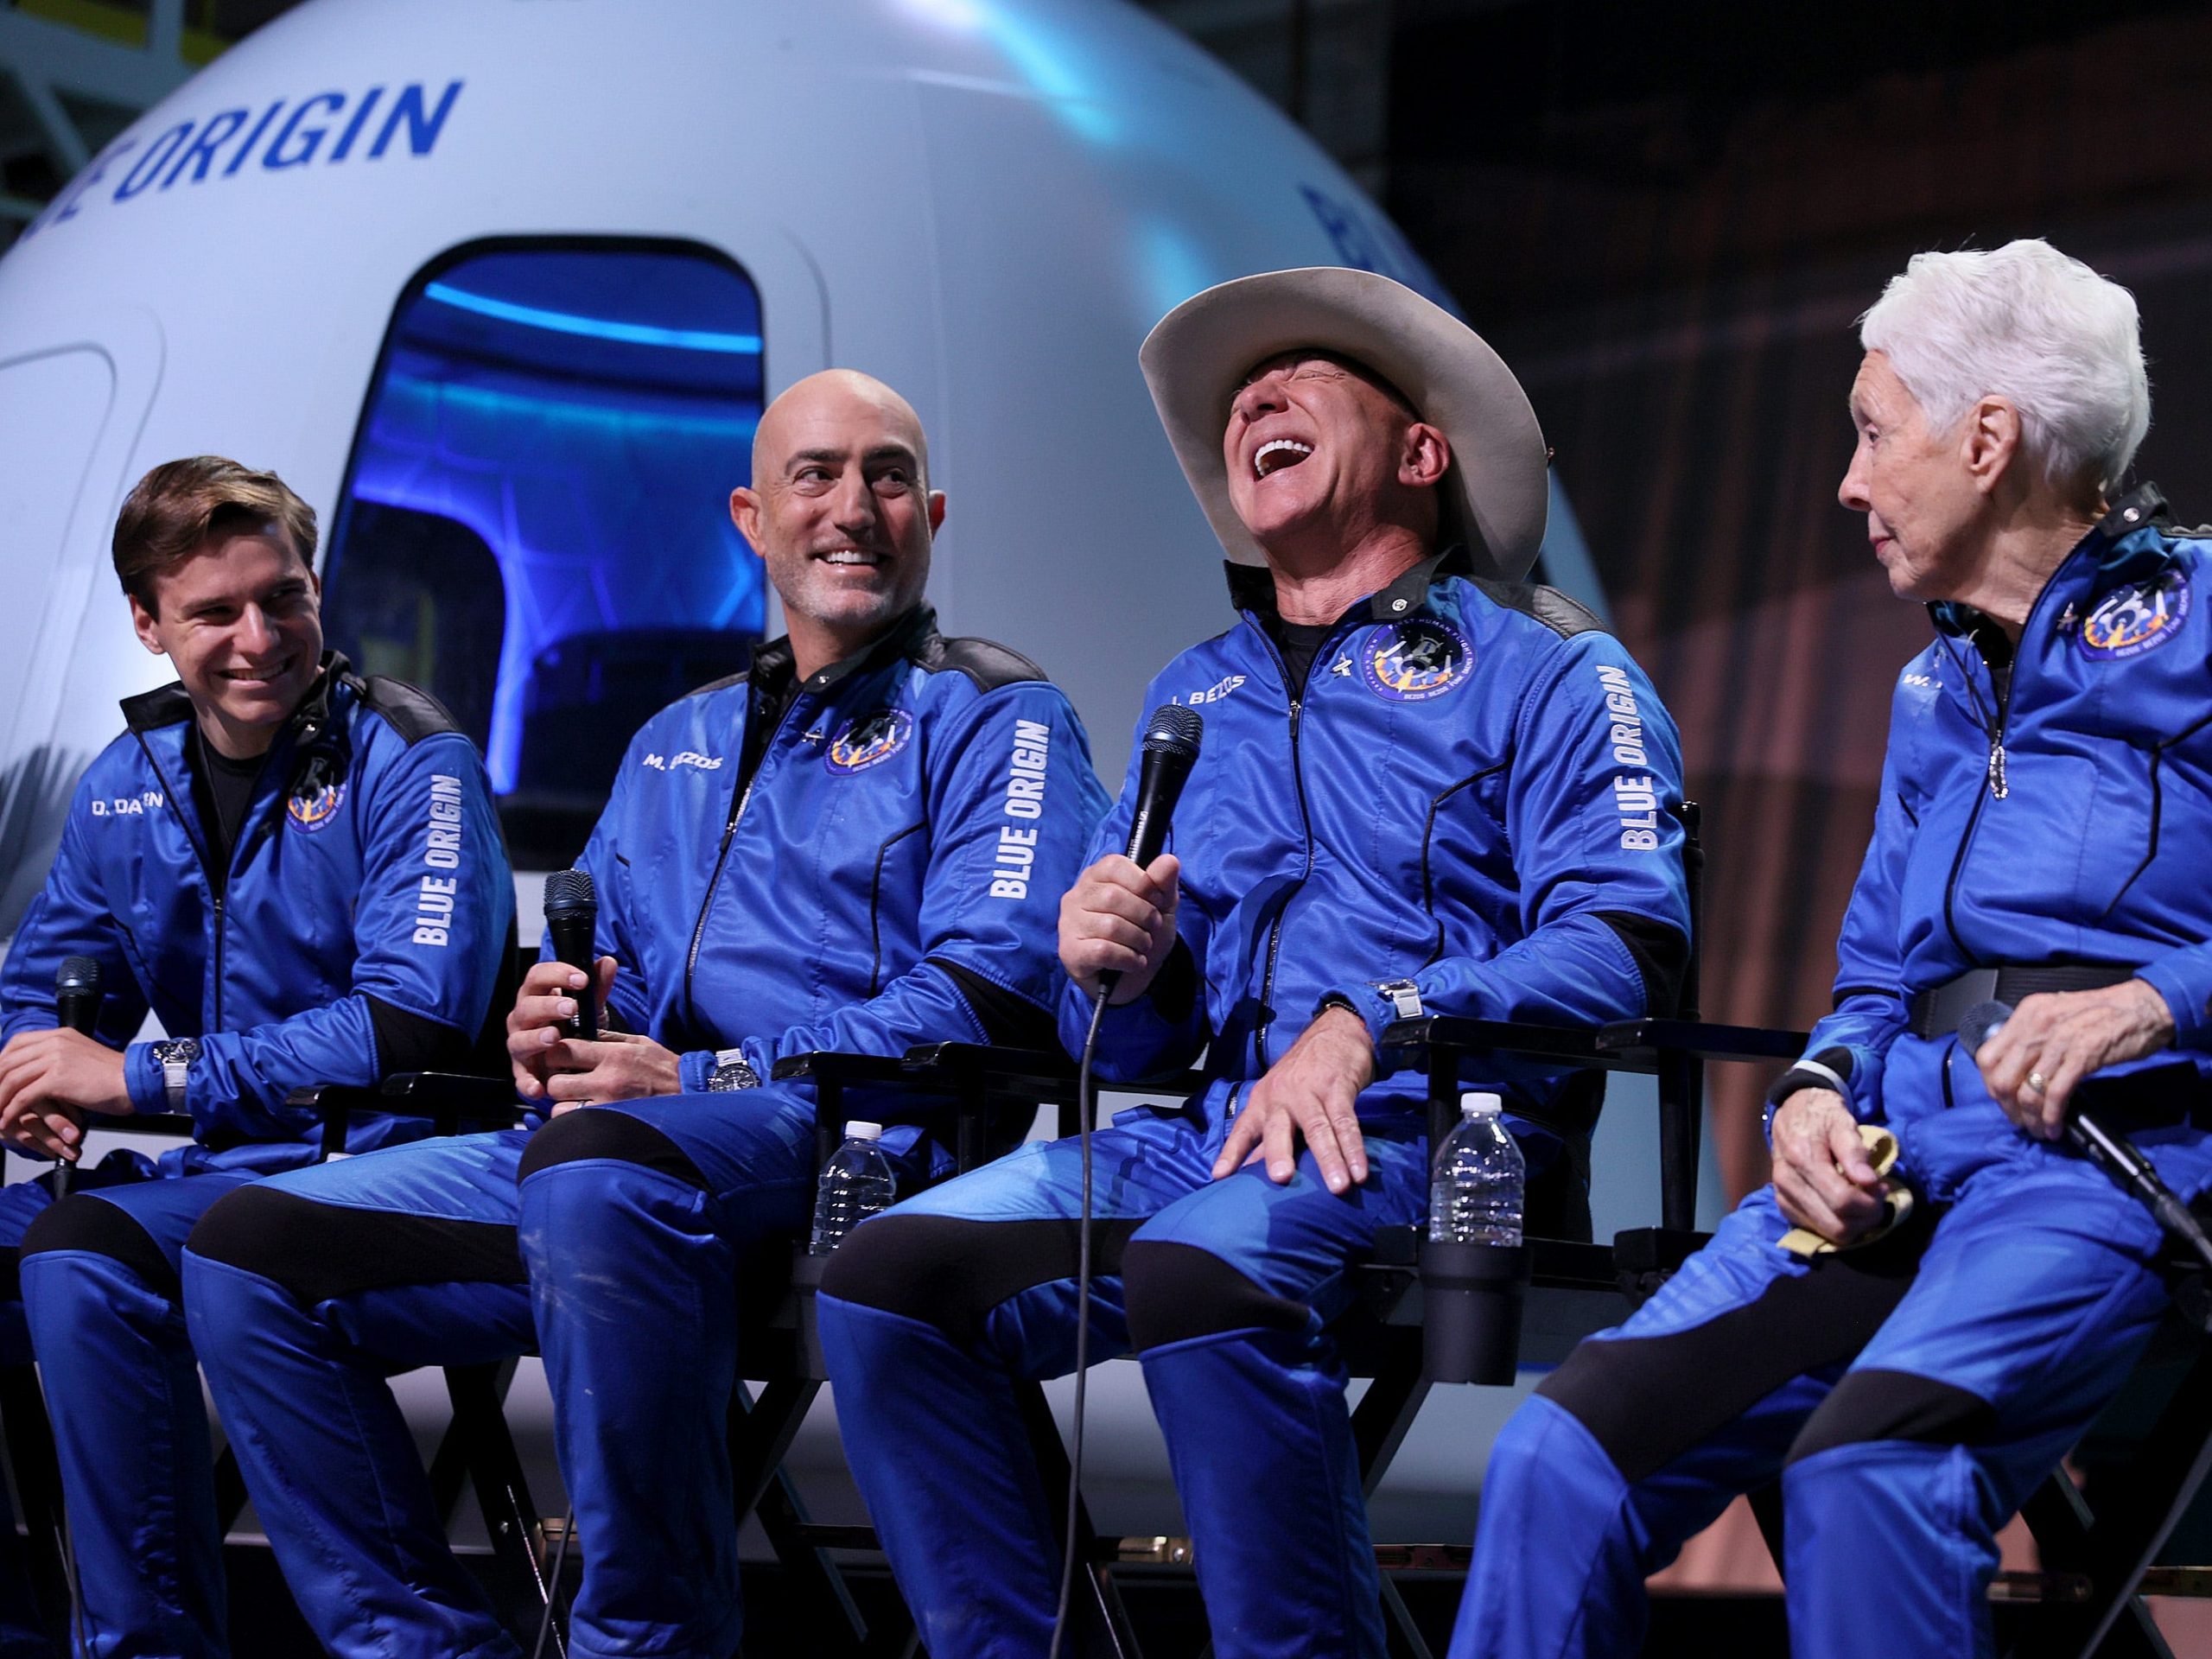 Blue Origin’s New Shepard crew is seen in blue flight outfits sitting in front of the shuttle's capsule.ª